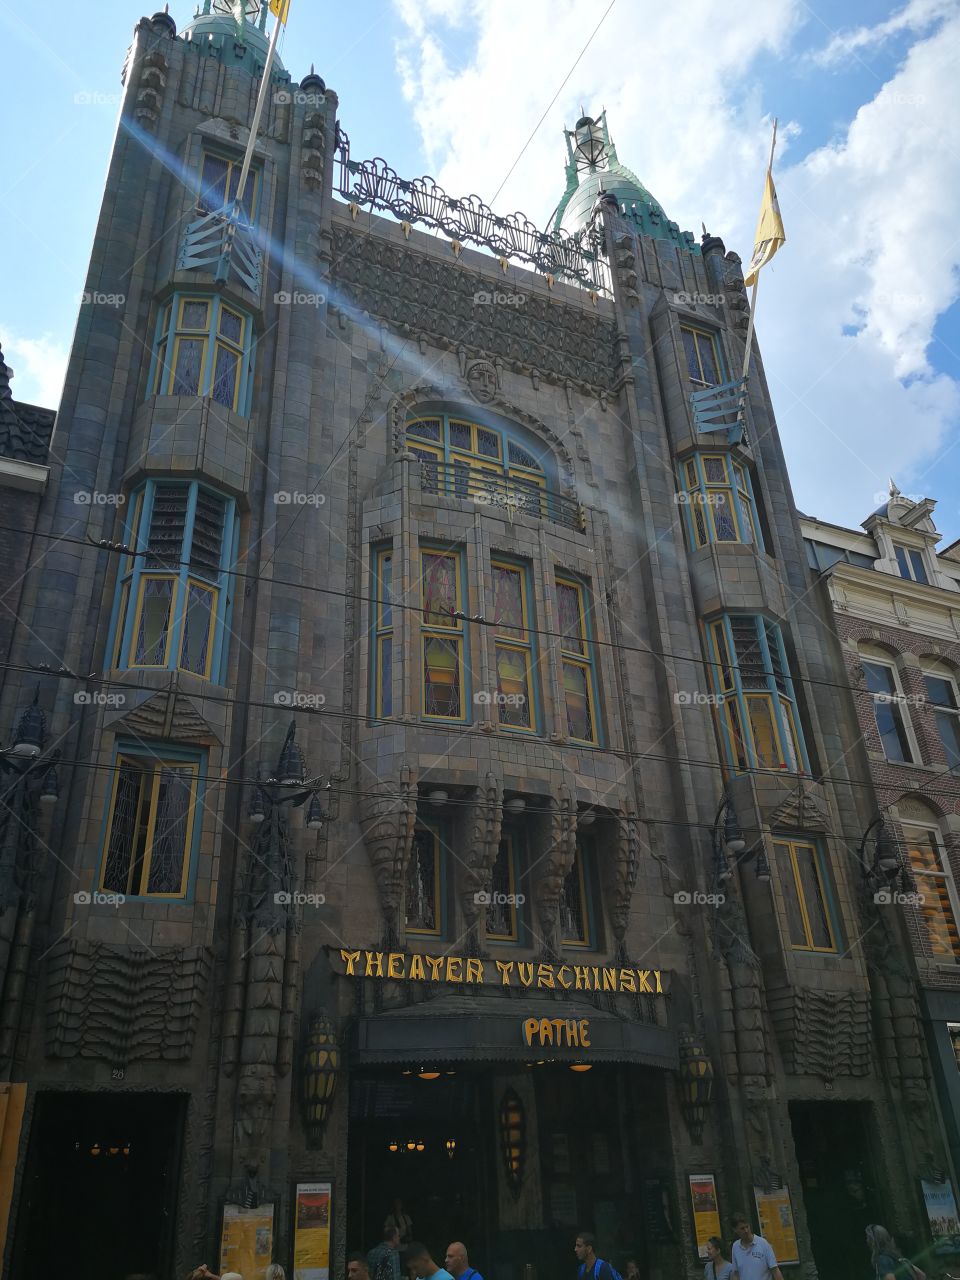 One of the old theatres in bruge. A beautiful building with a long and rich history.